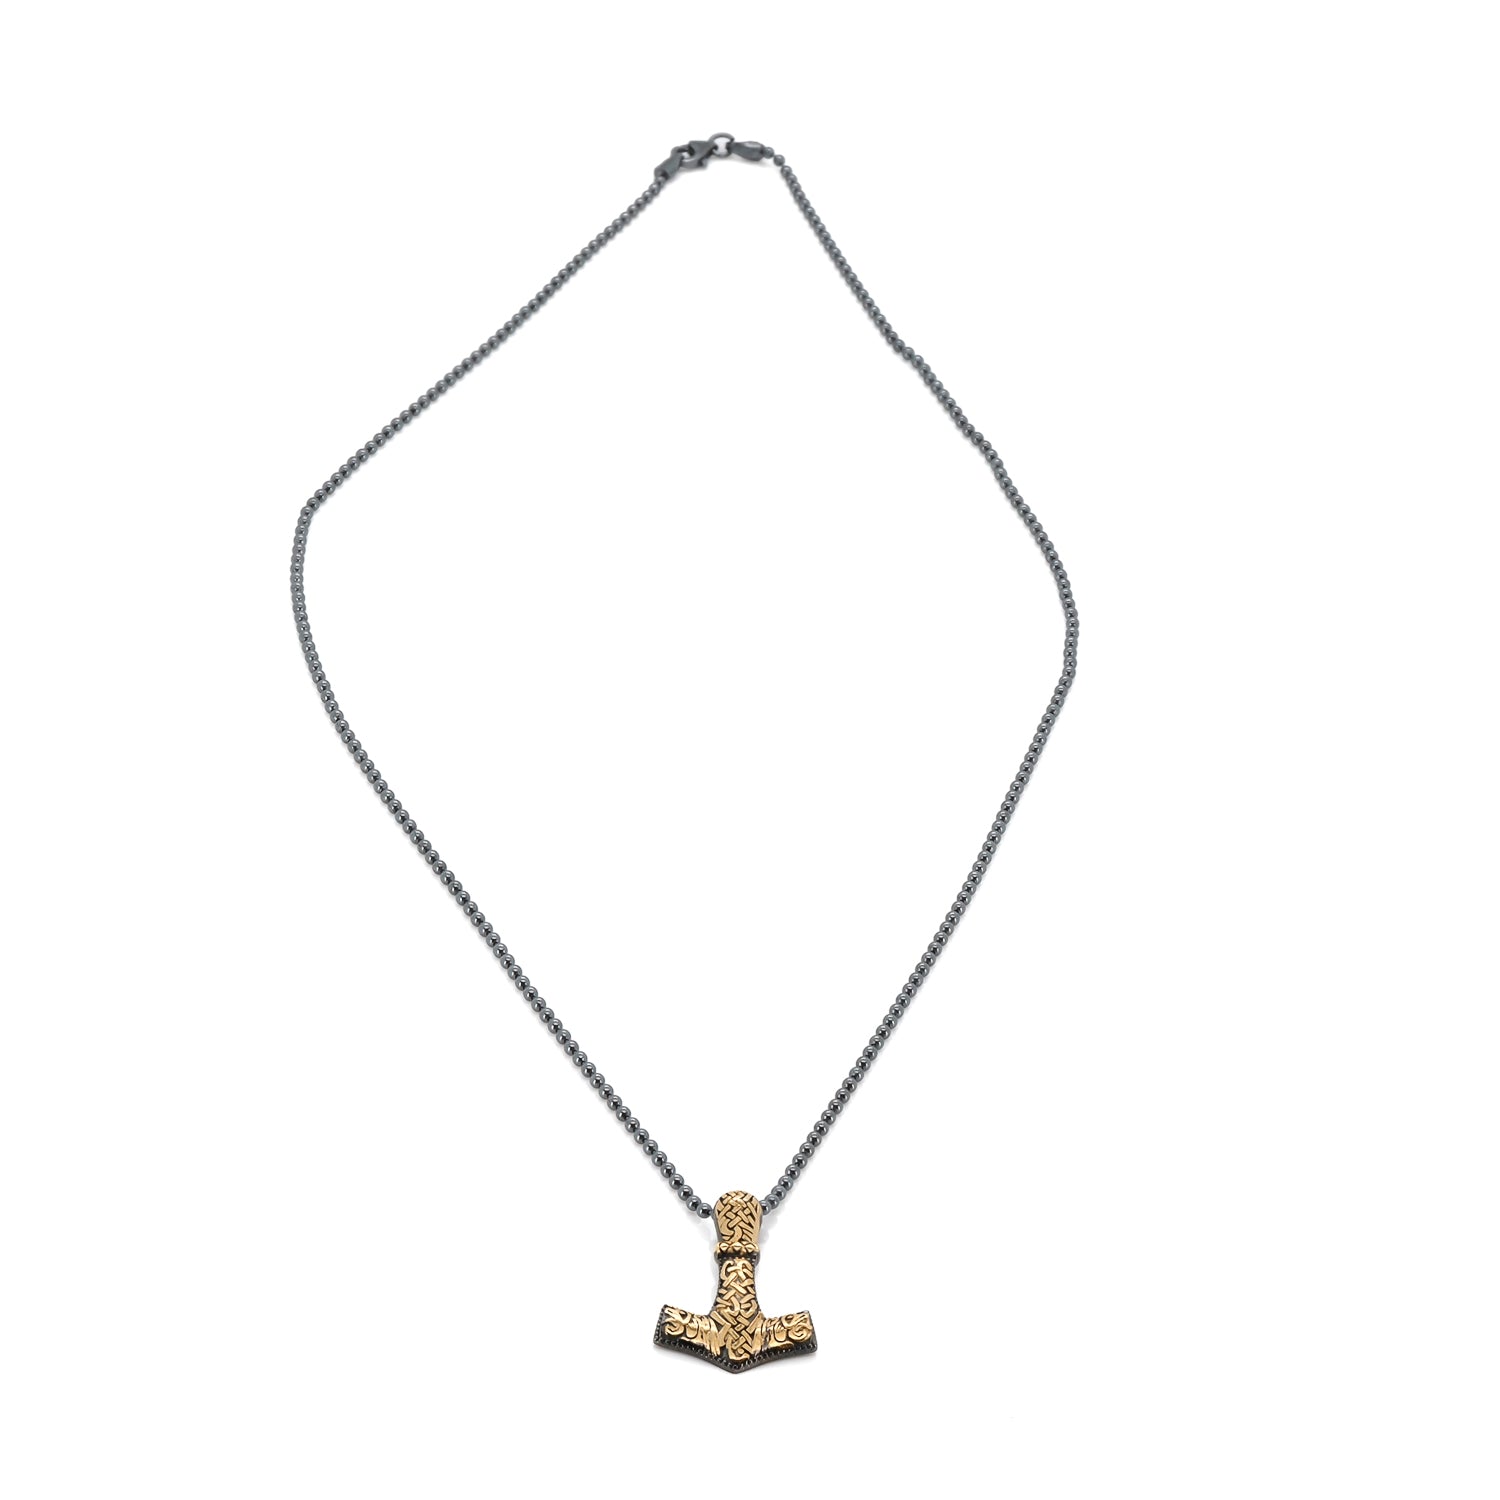 Striking power: Thor Hammer Necklace with 24K Gold Plating